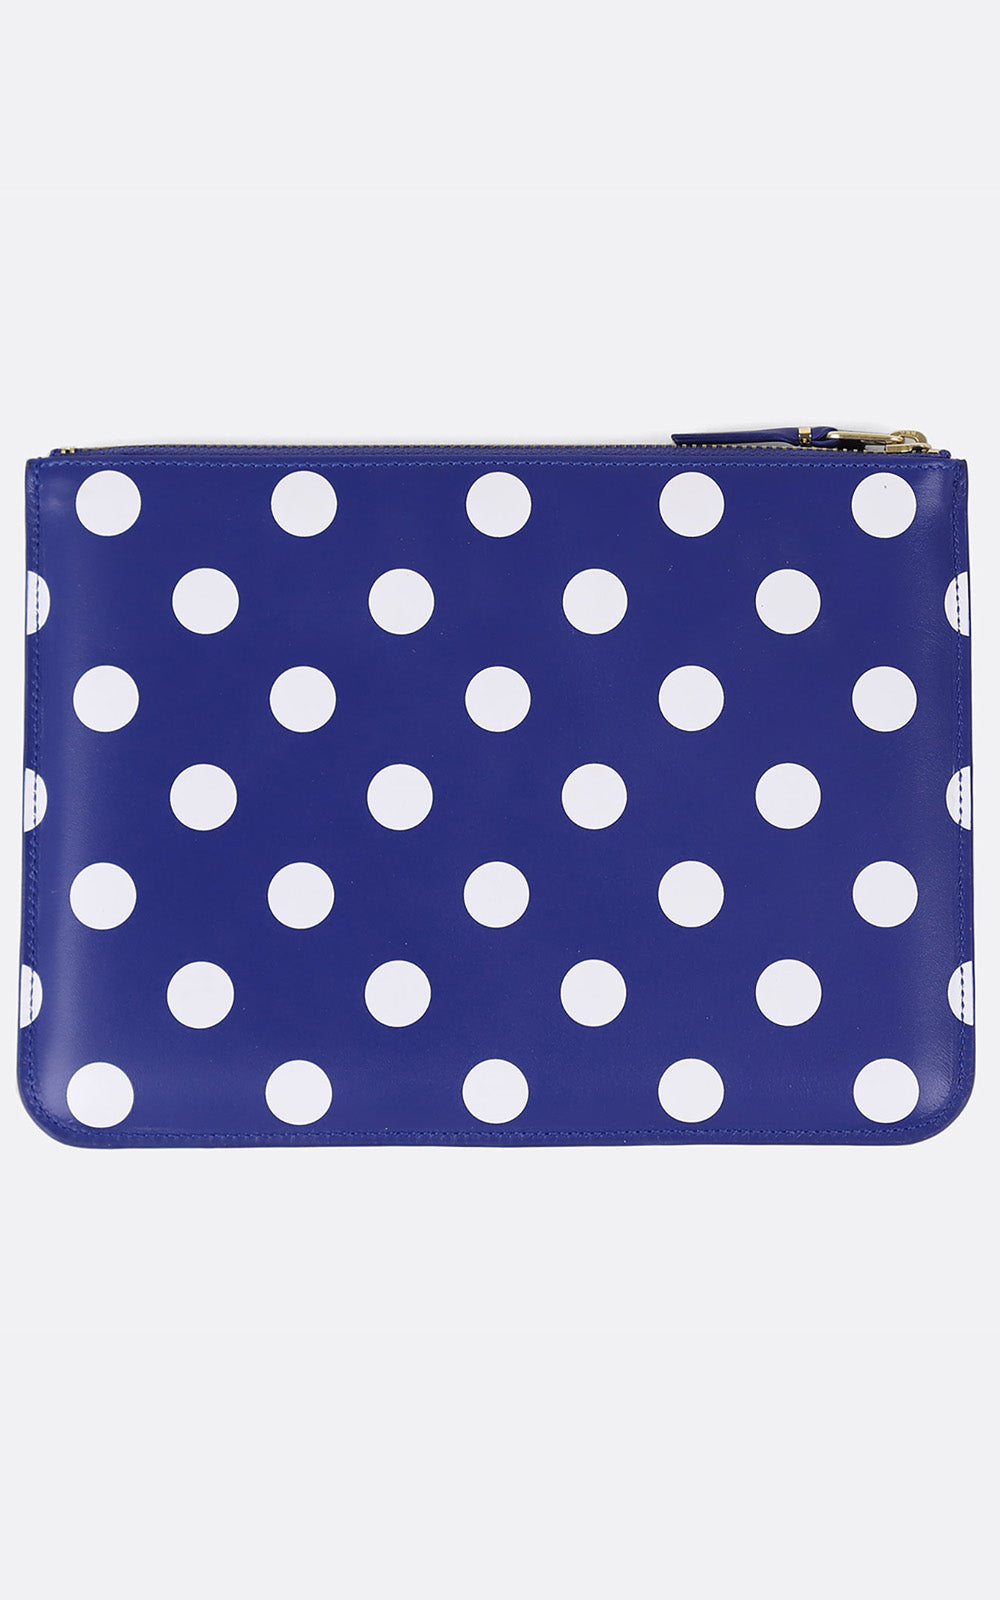 WALLET / BIG POUCH DOT LEATHER NAVY